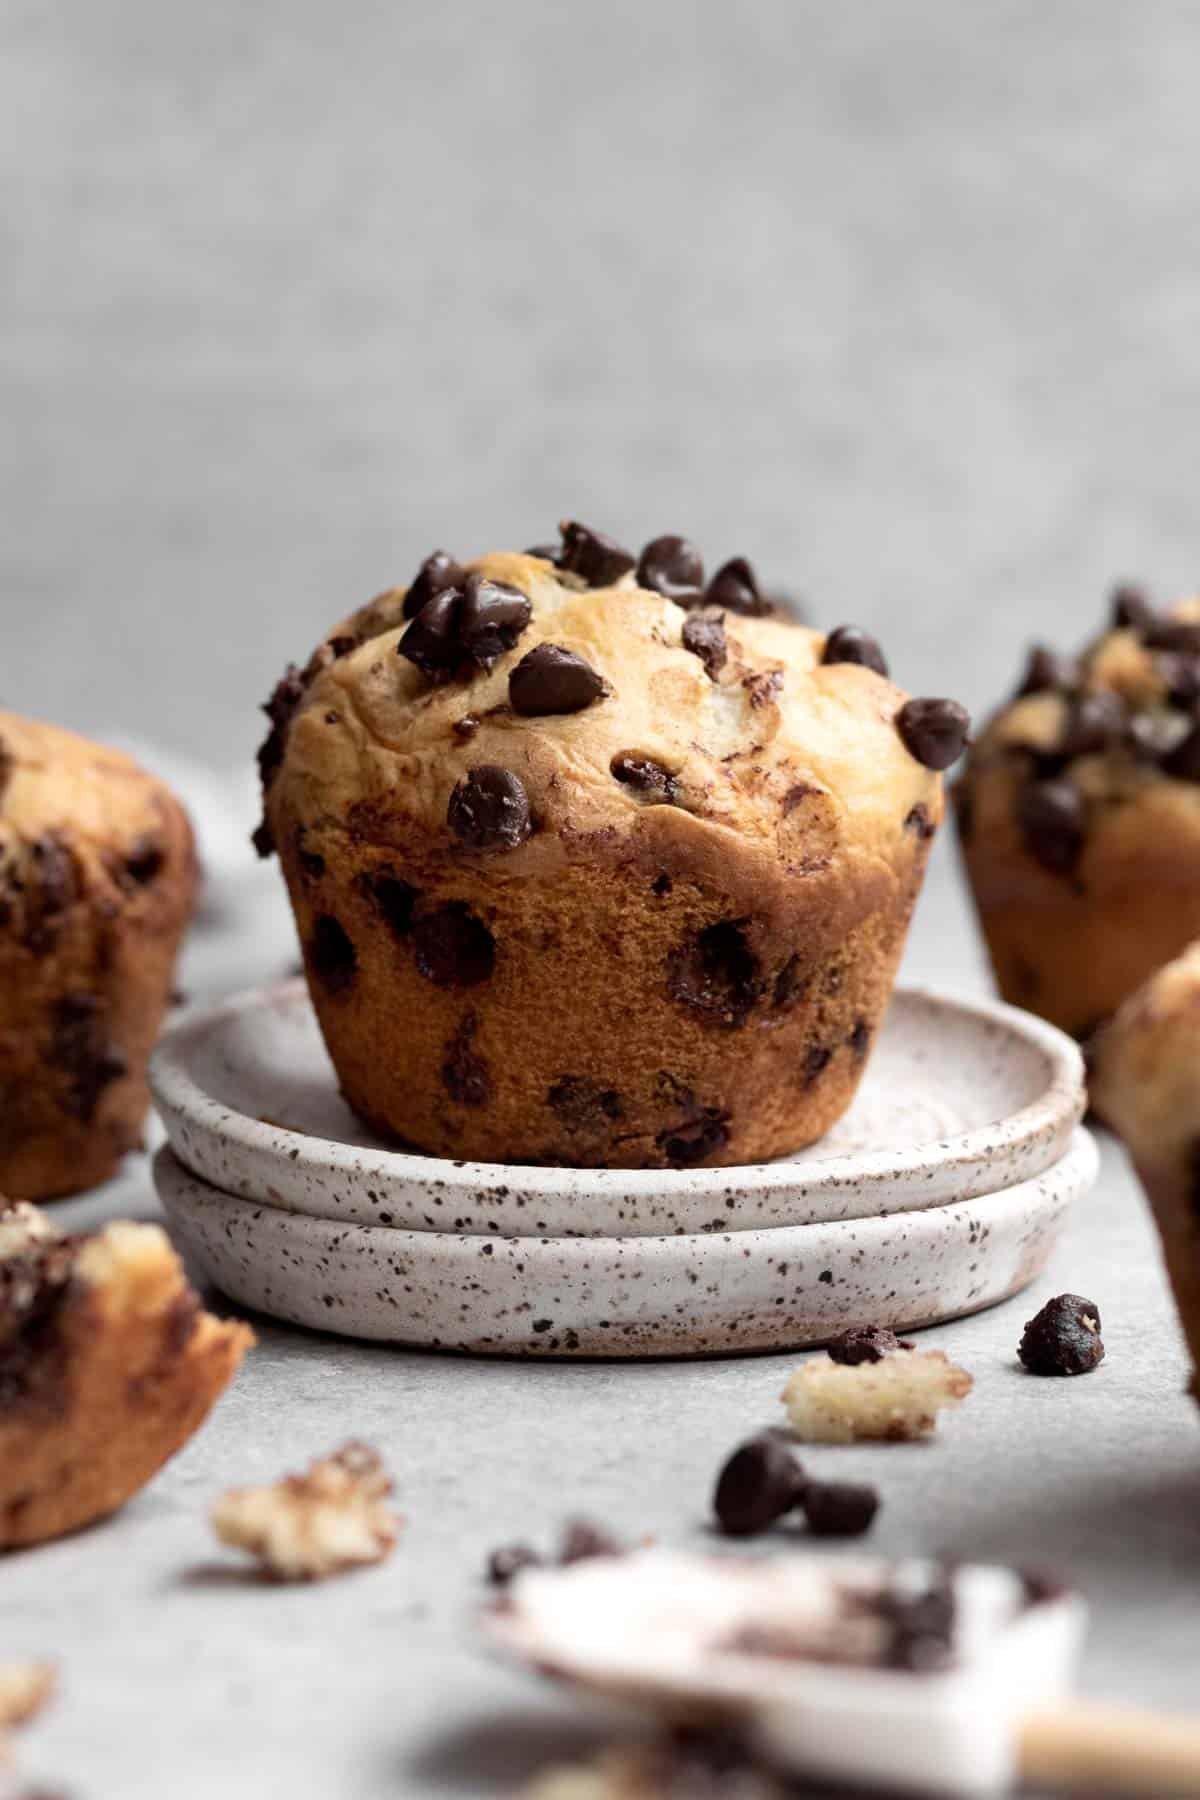 A fresh muffin on clay dishes higher than the rest.